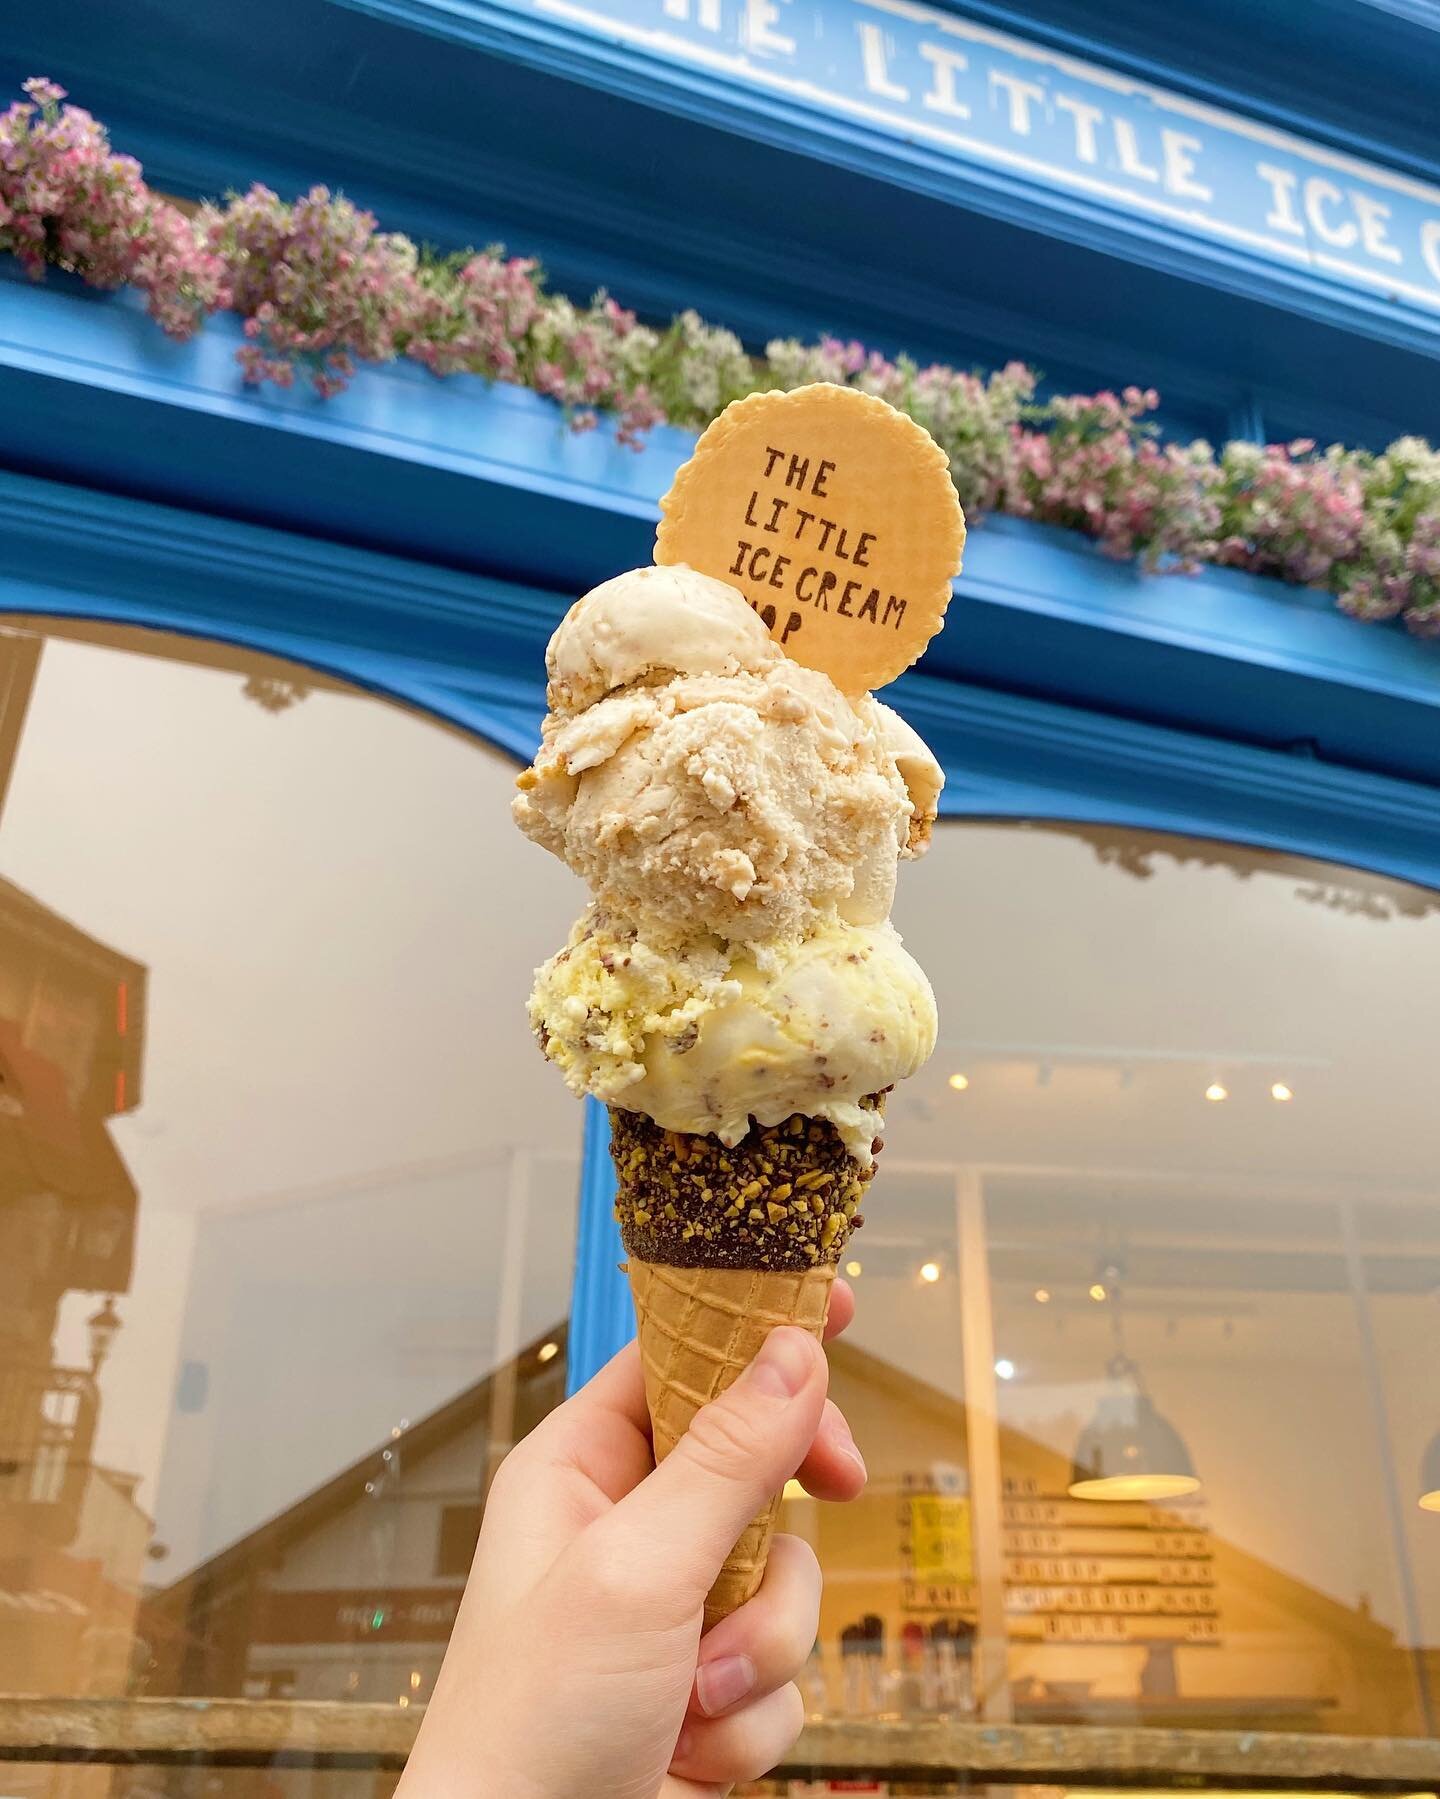 The Lakes is back to its usual weather today 🌧 

We&rsquo;ve got some of your seasonal favourites back - Hawkshead Gingerbread &amp; Chocolate Orange 🍊 Is it too early for Mince Pie ice cream? 👀 🎅🏼 

Only 8 more days until we close folks ✨